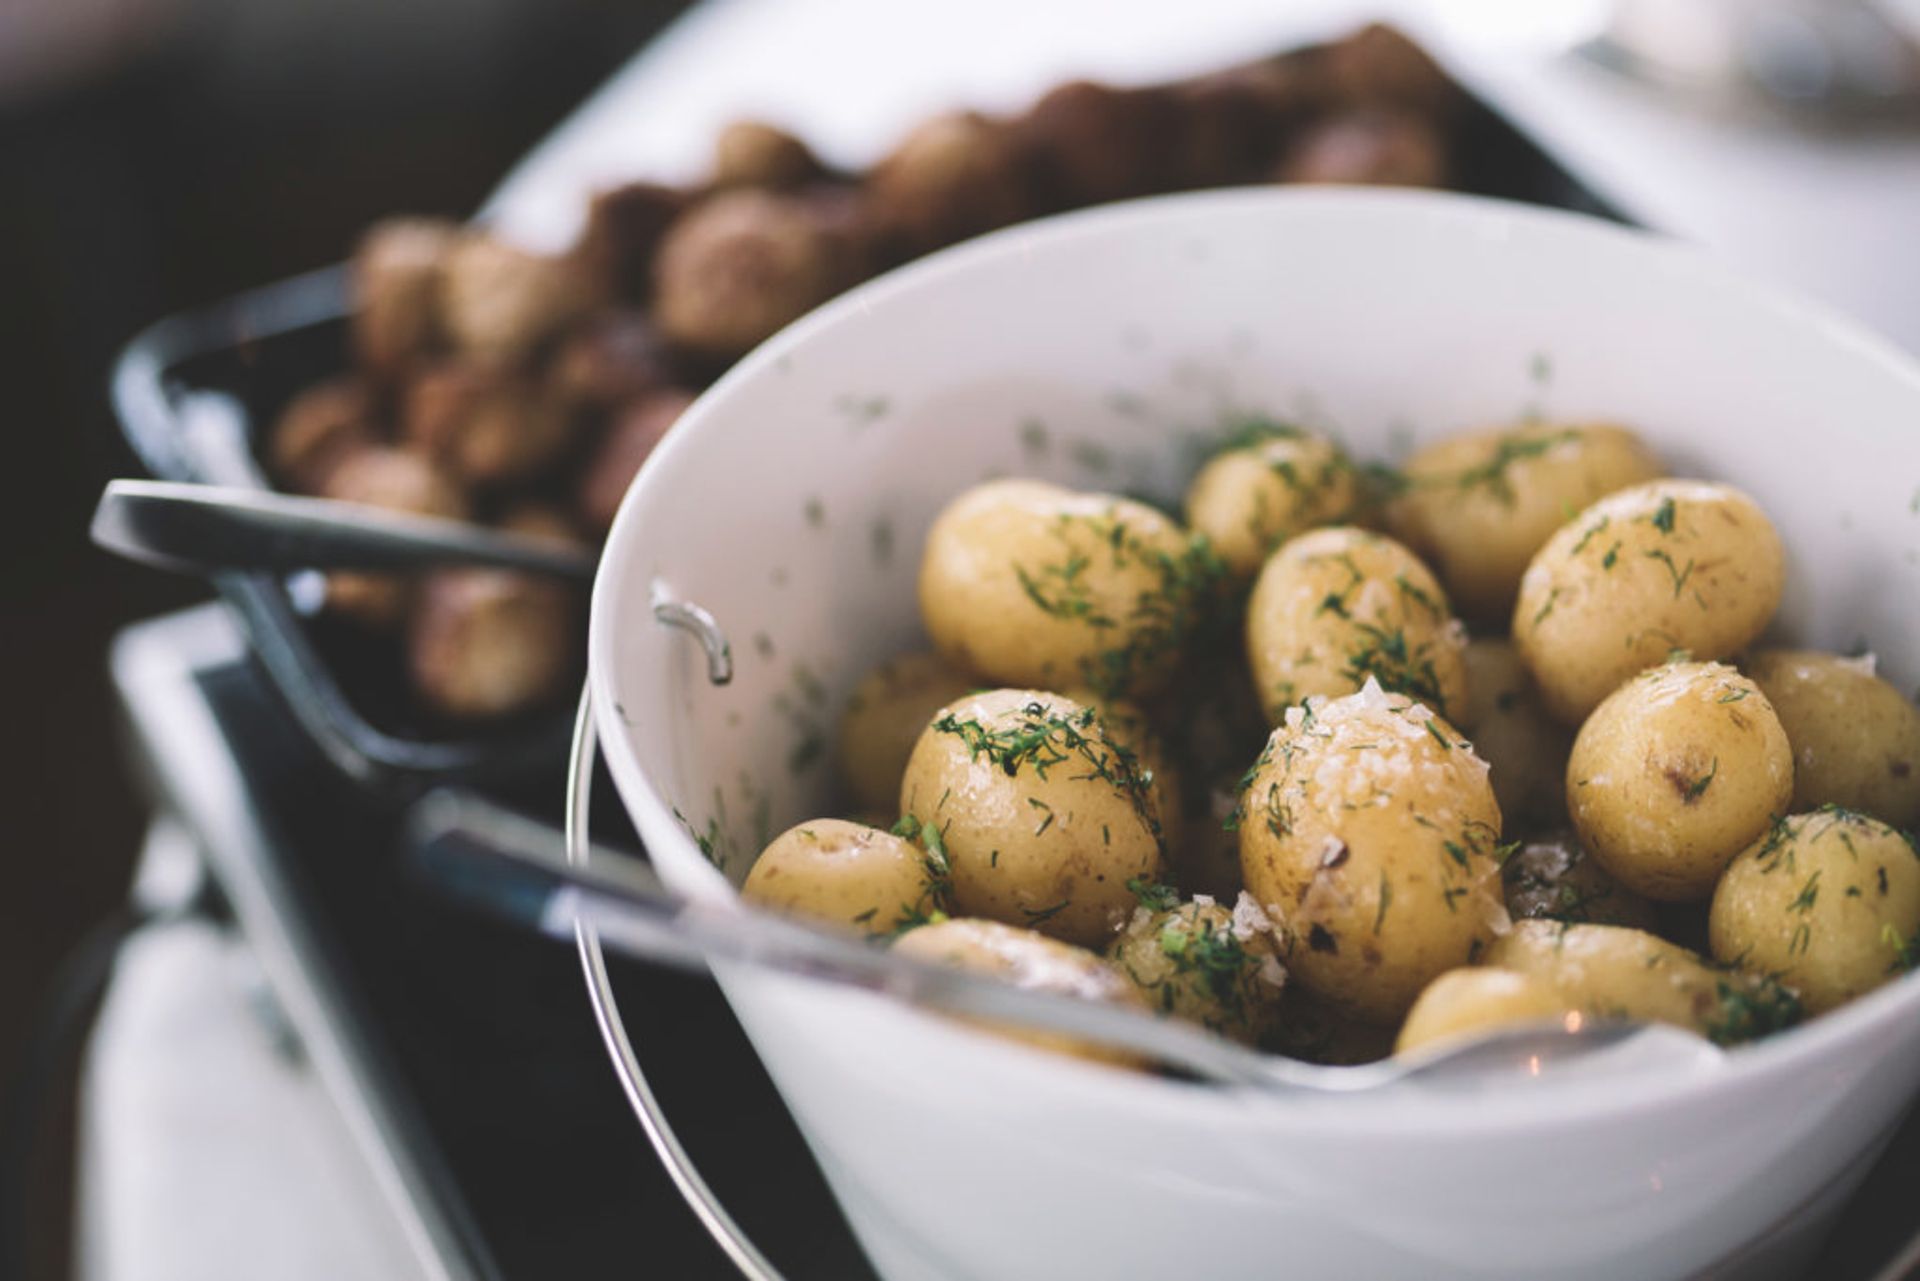 Boiled potatoes with dill (Source: Alexander Hall/imagebank.sweden.se)